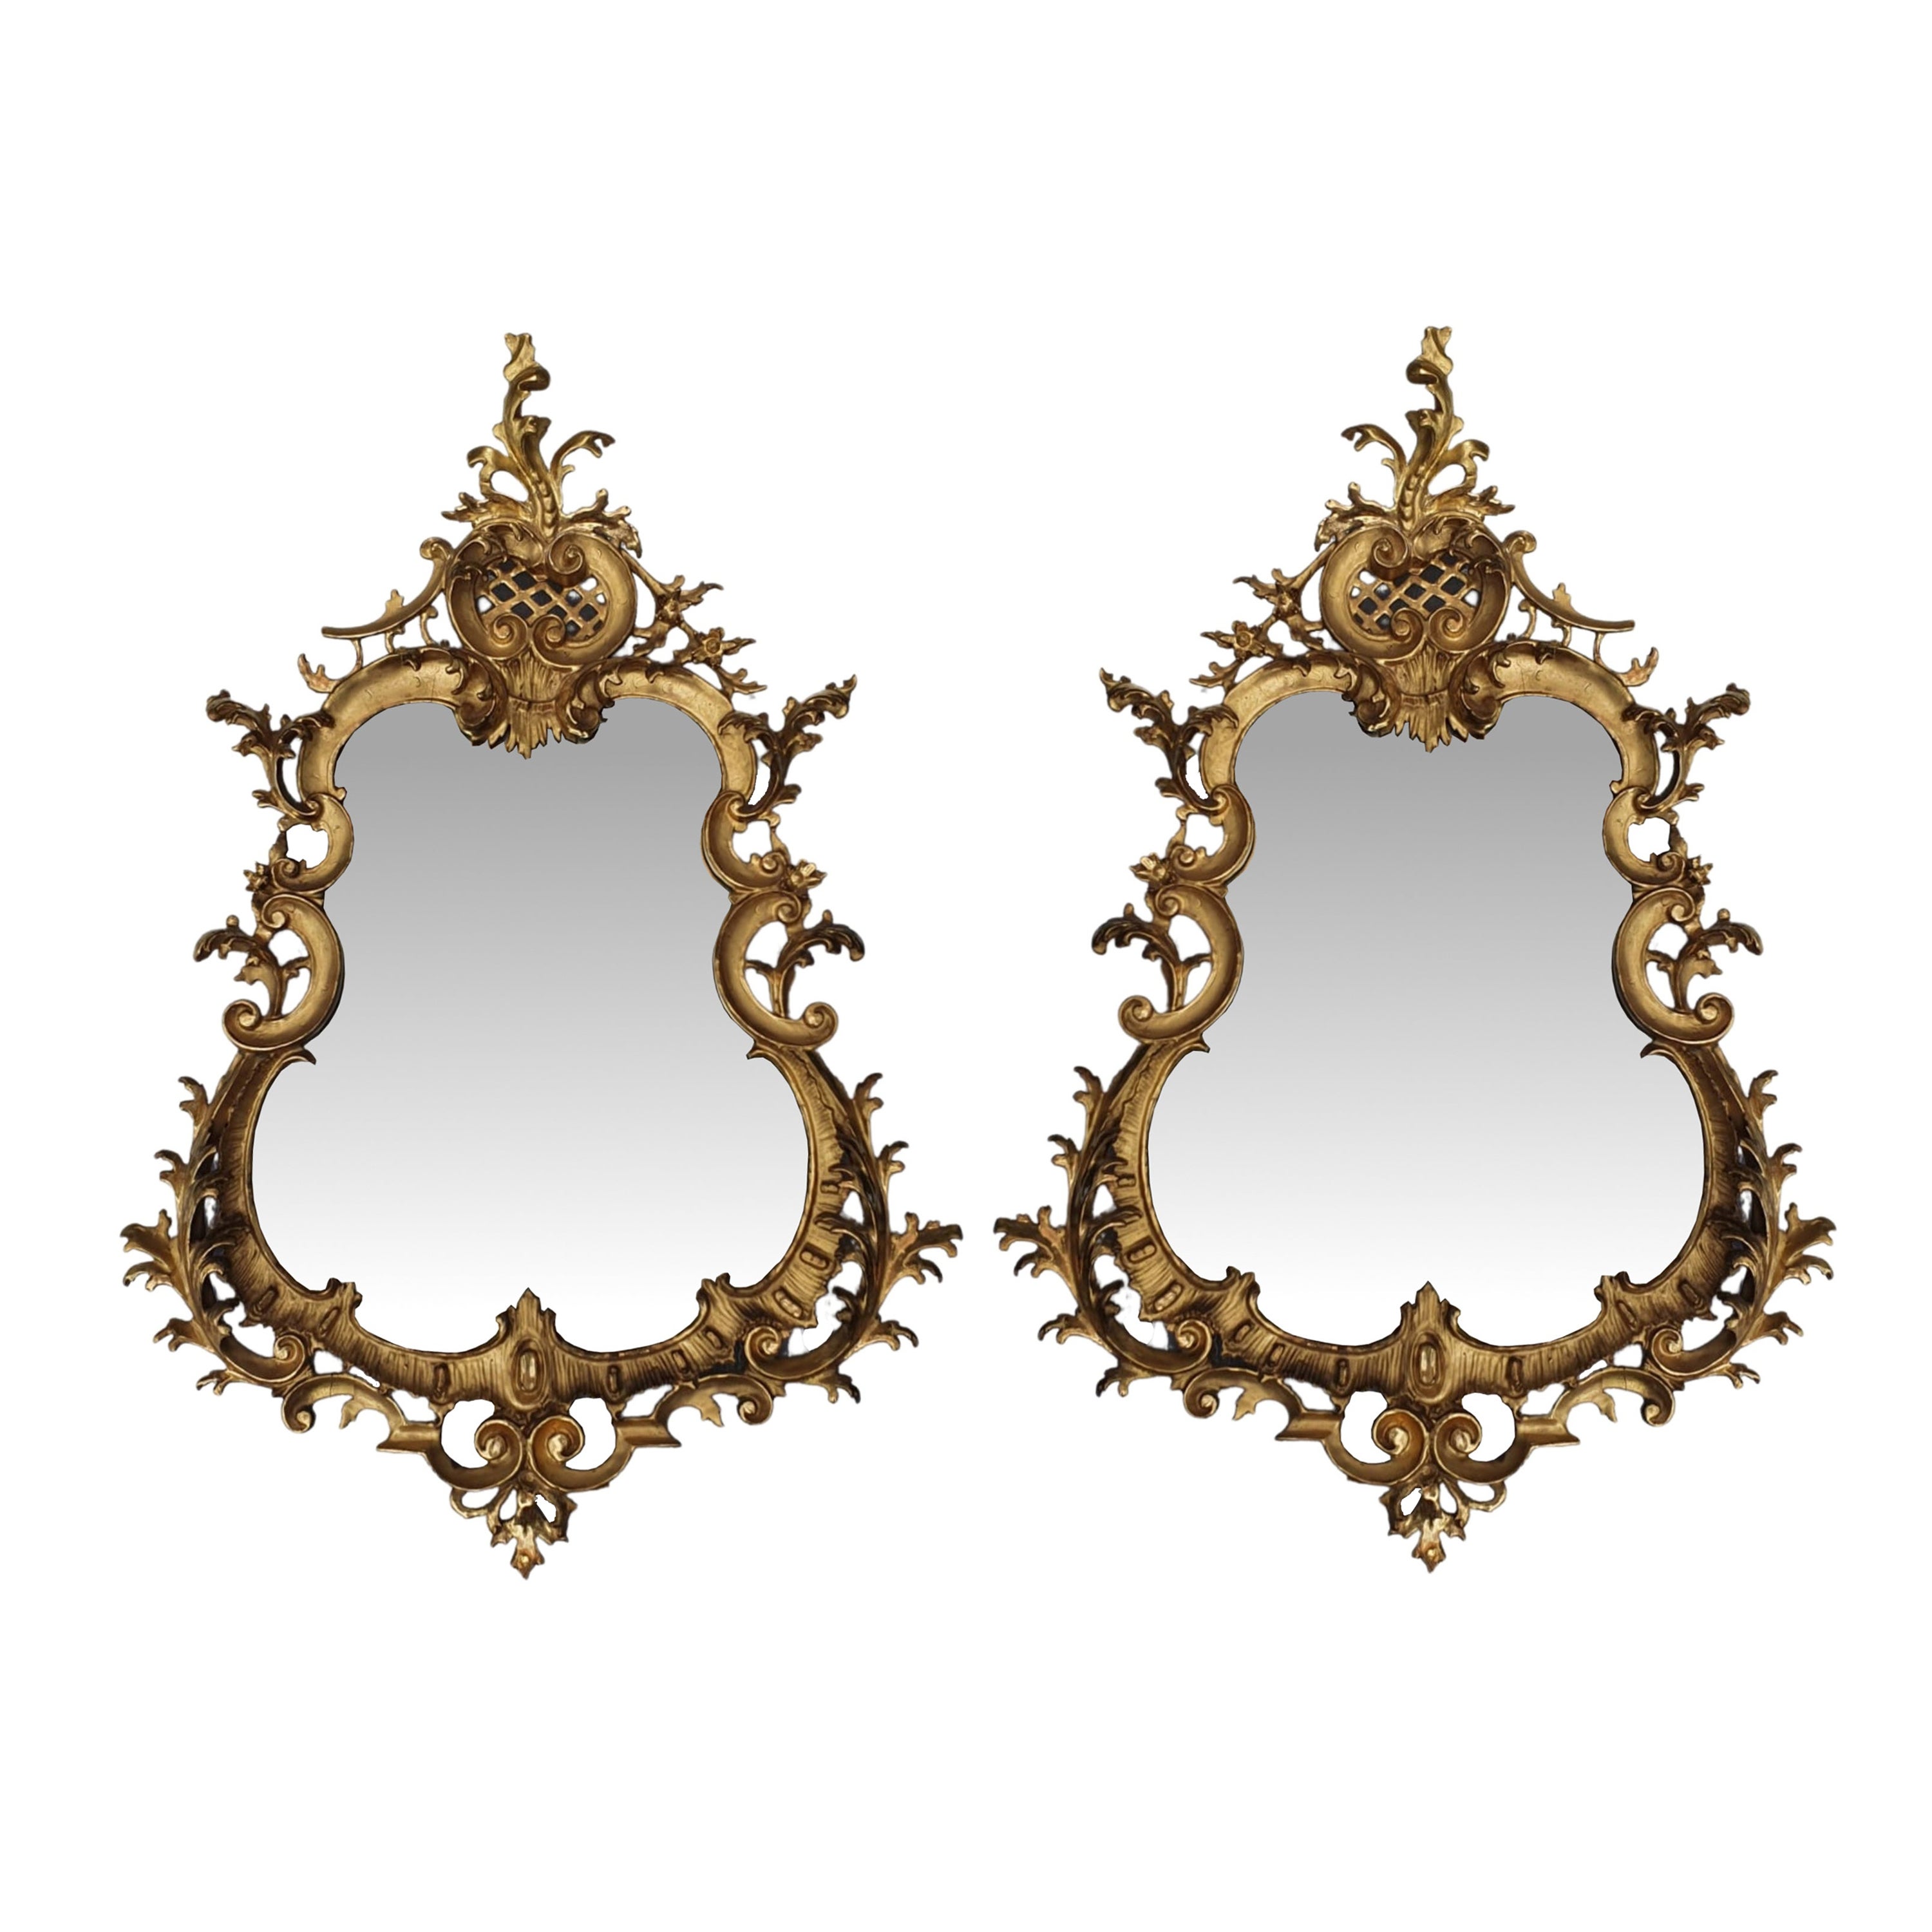 Rare Pair of 19th Century Pier Giltwood Mirrors in the Rococo Manner